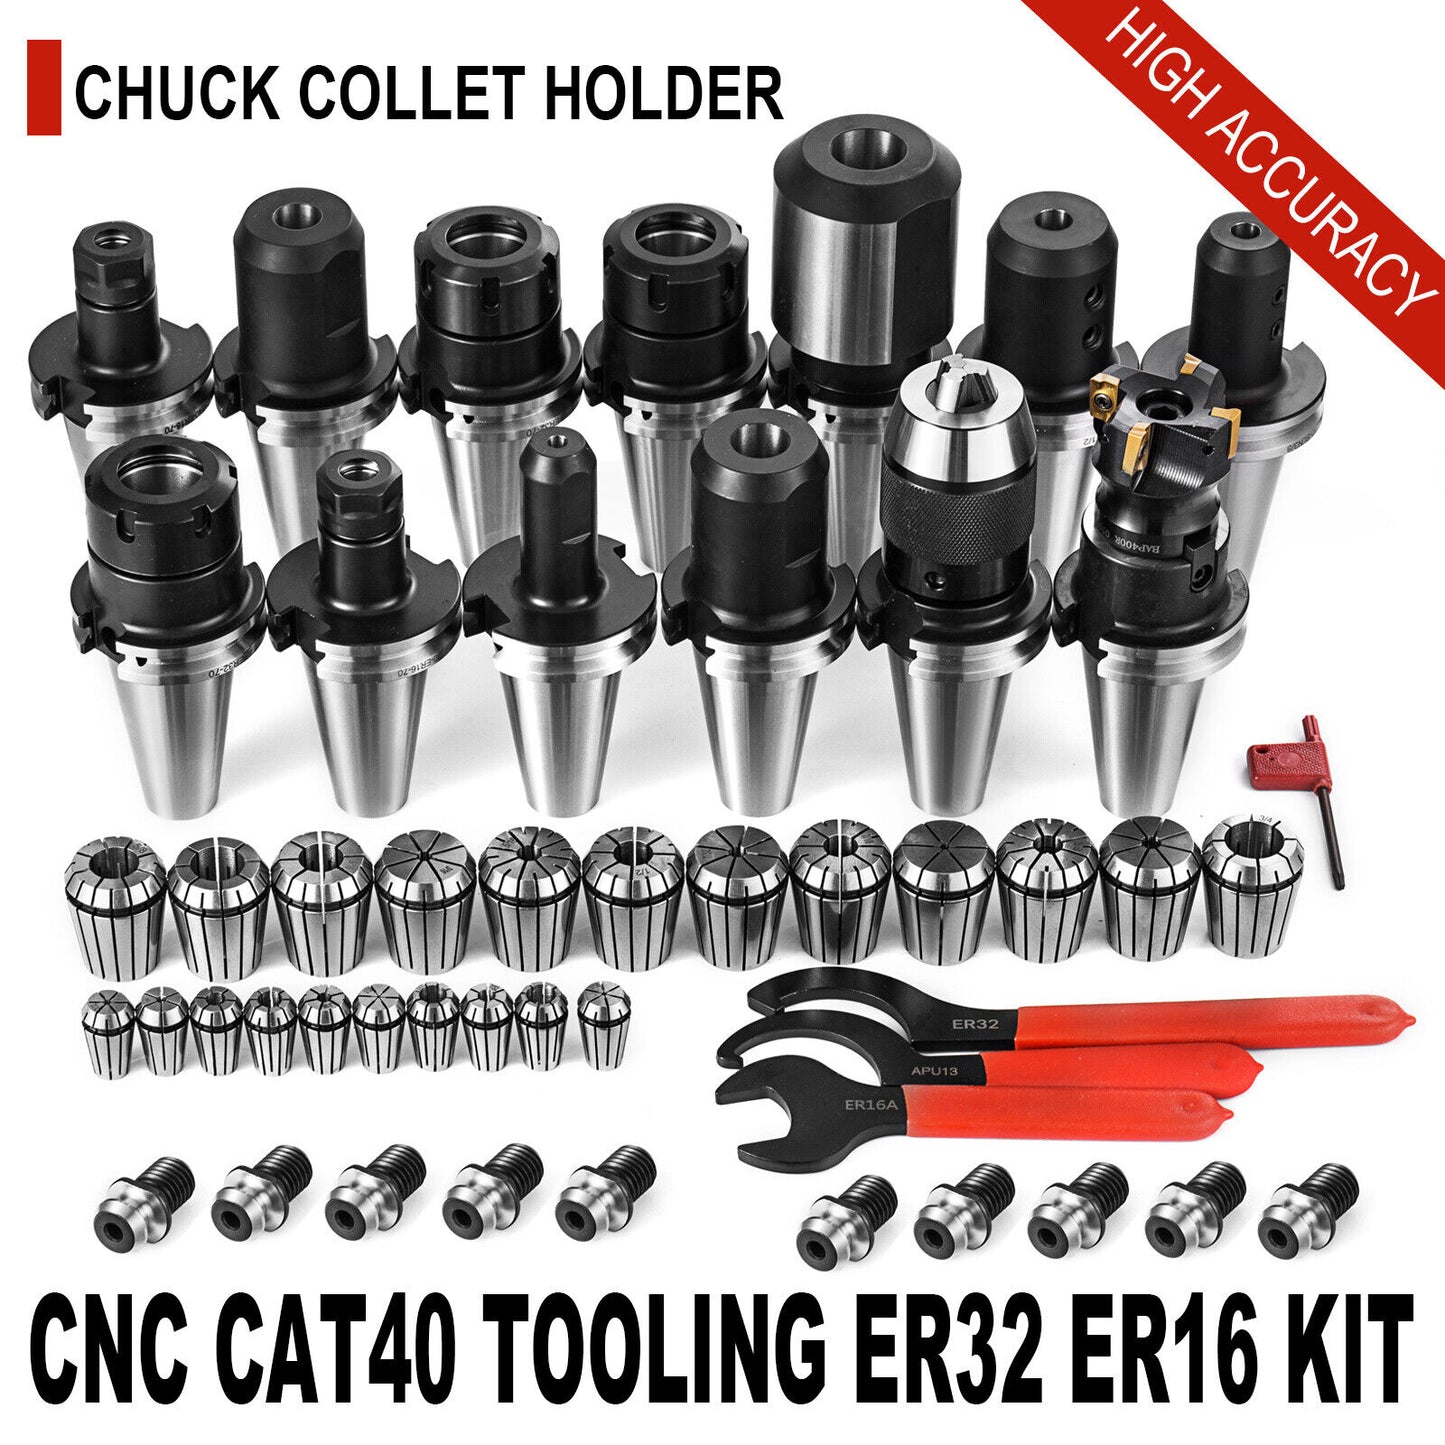 CAT 40 Tool Holder Kit for Haas Fadal CNC Mill ER32/16 Chuck Collet Set NEW